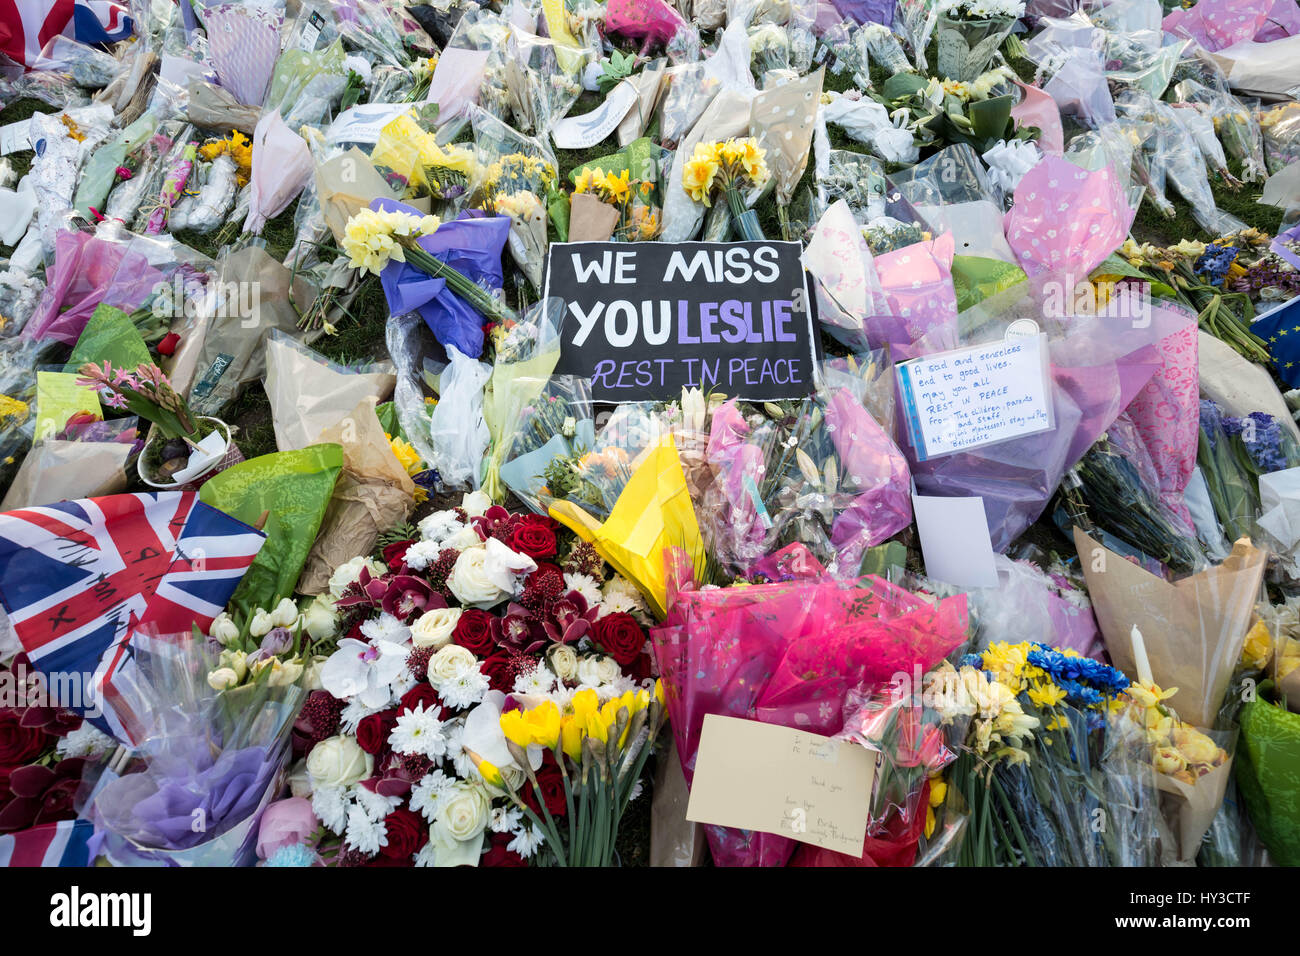 Floral tributes are laid out in Westminster, London in remembrance of the victims of the terror attack on 22nd March 2017 which claimed four lives including a Metropolitan police officer, PC Keith Palmer. Stock Photo